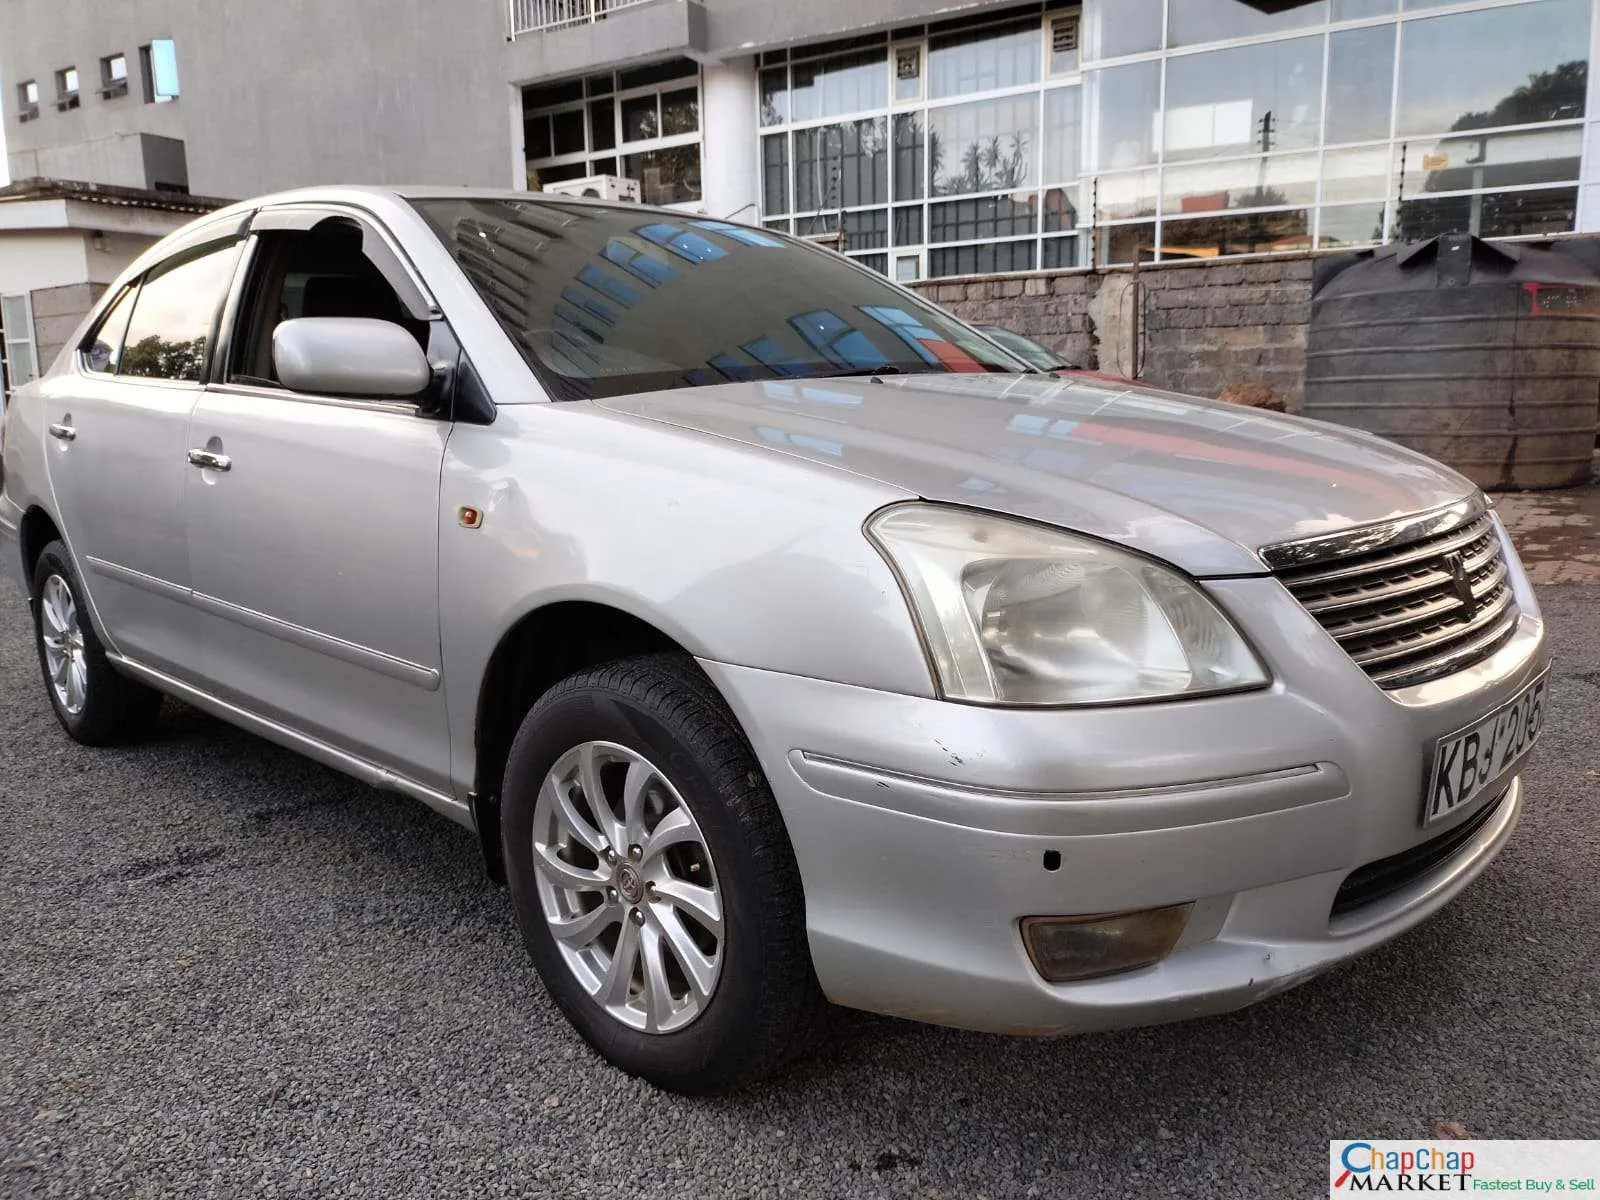 Cars Cars For Sale/Vehicles-Toyota PREMIO 240 Quick sale 30% Deposit Trade Exclusive 9